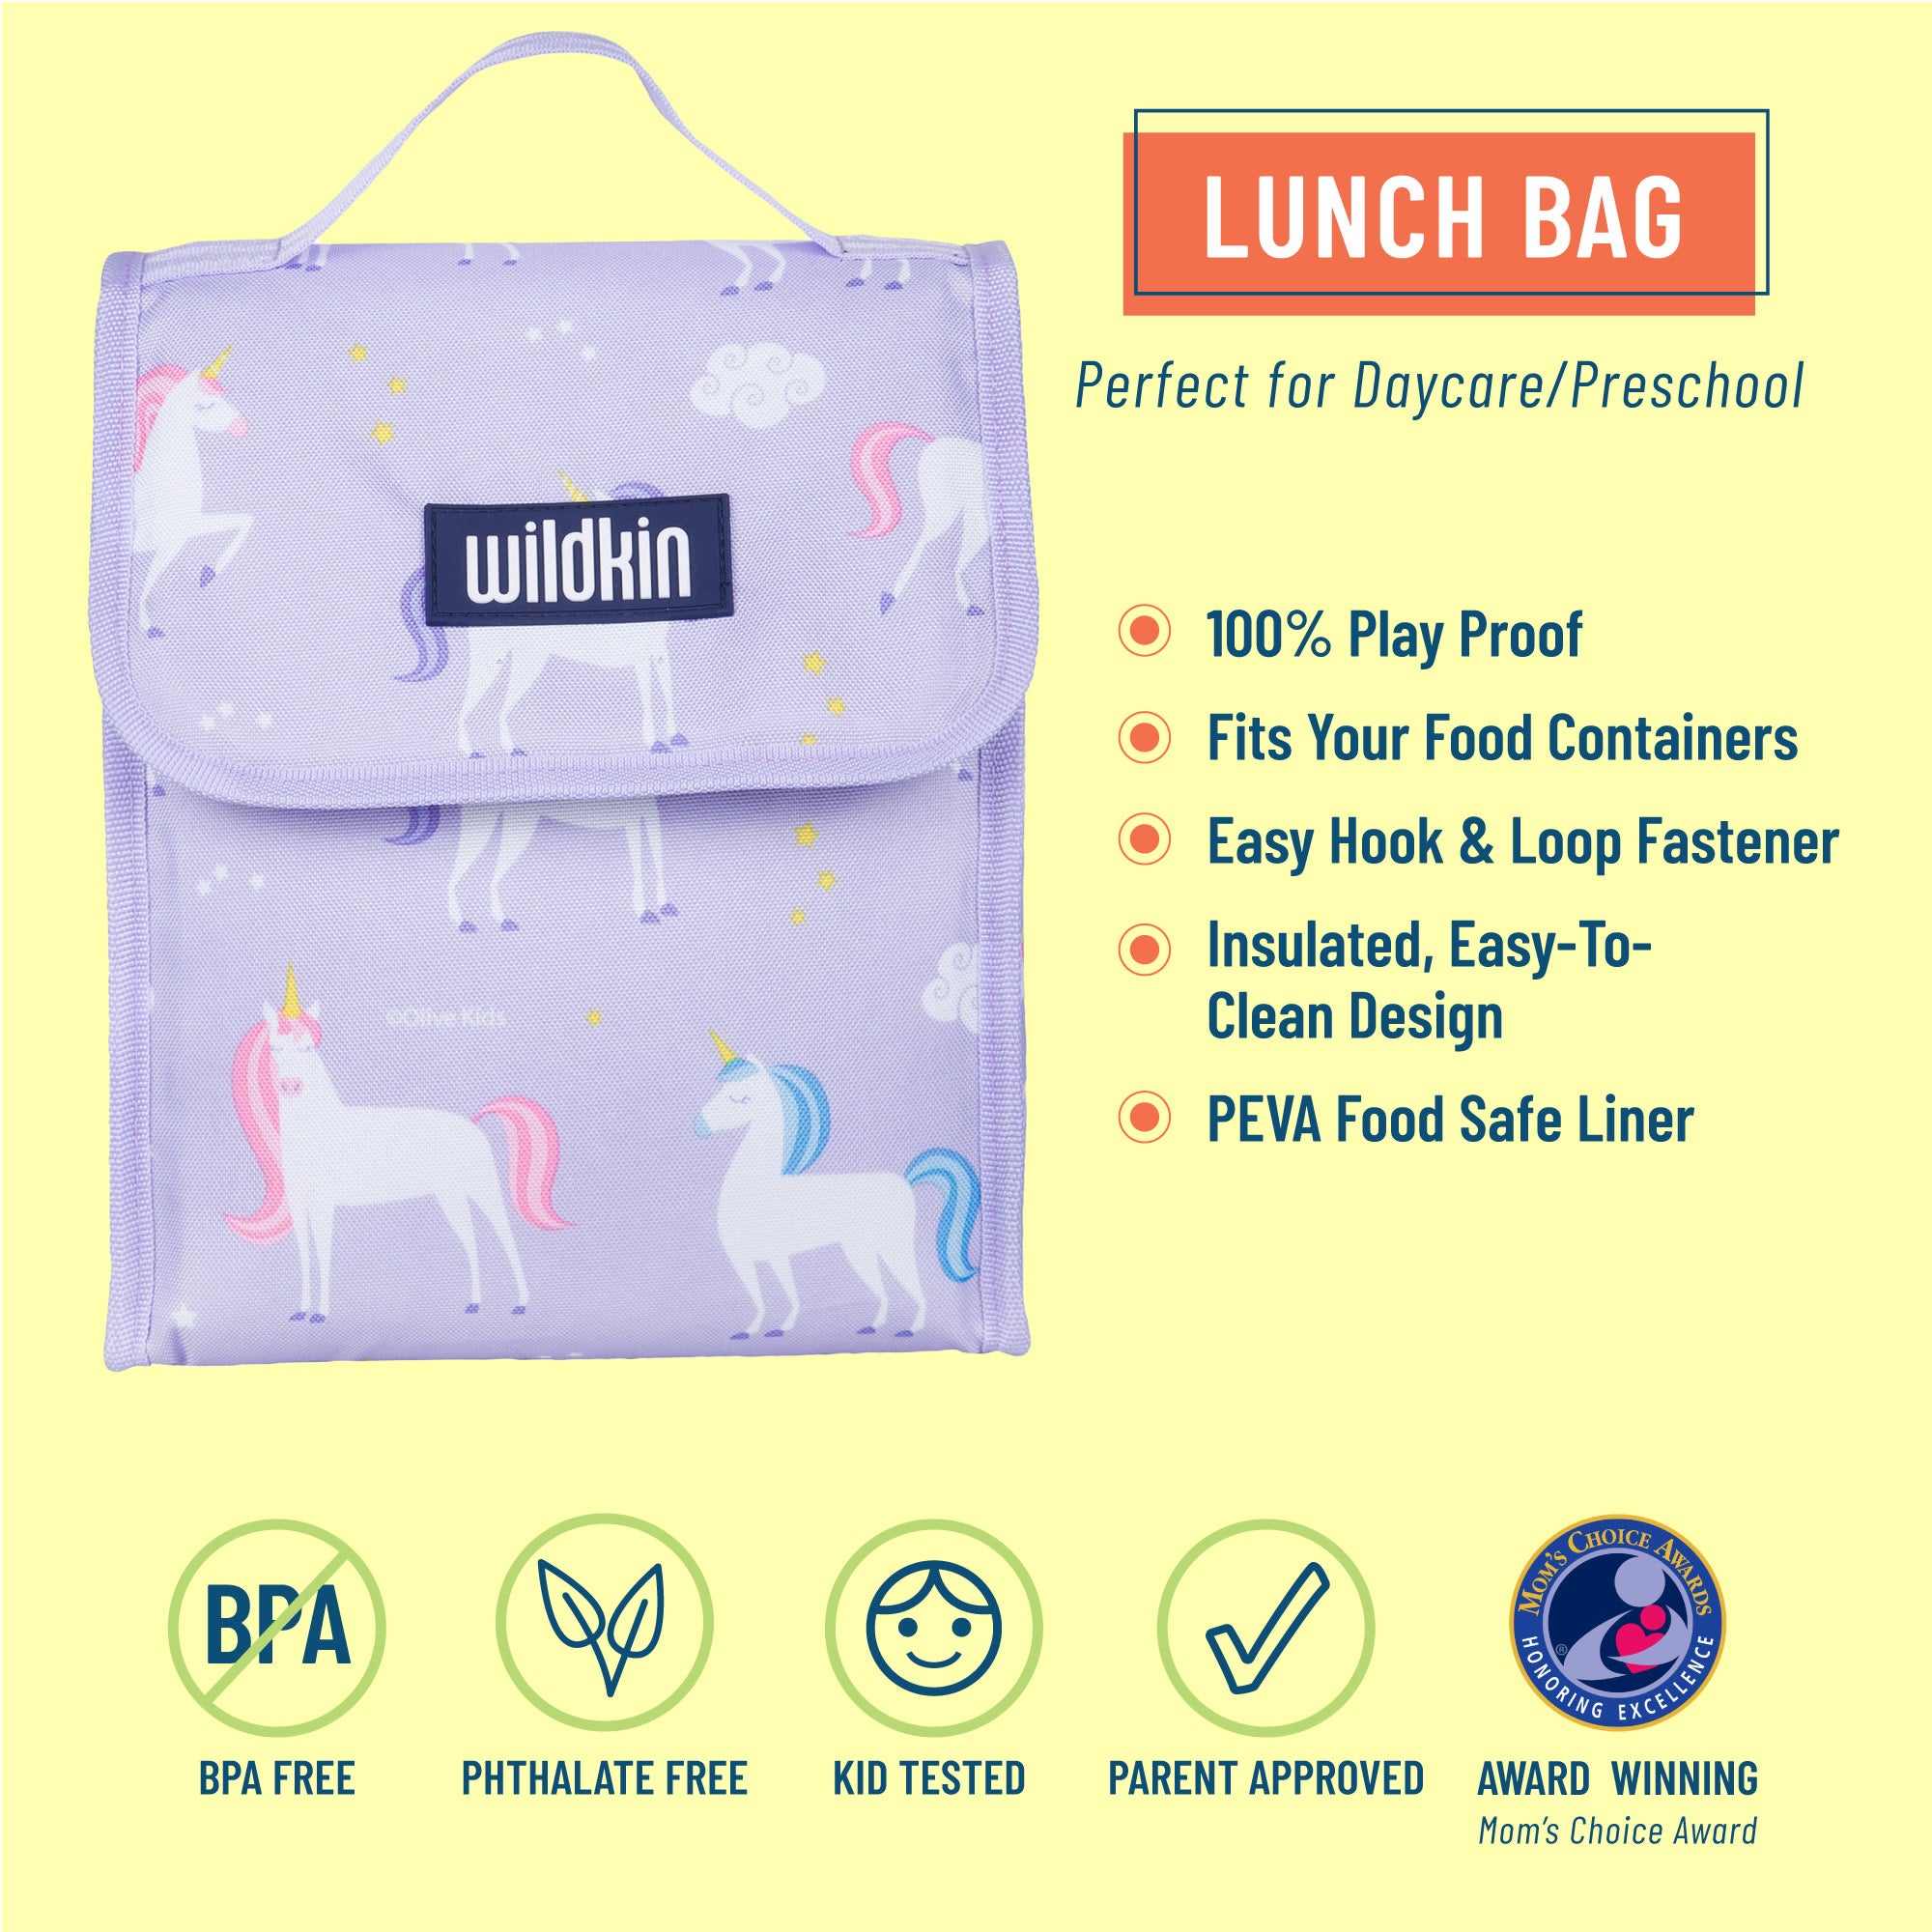 Wildkin Unicorn Lunch Box Gifts For The Rider Kids at Chagrin